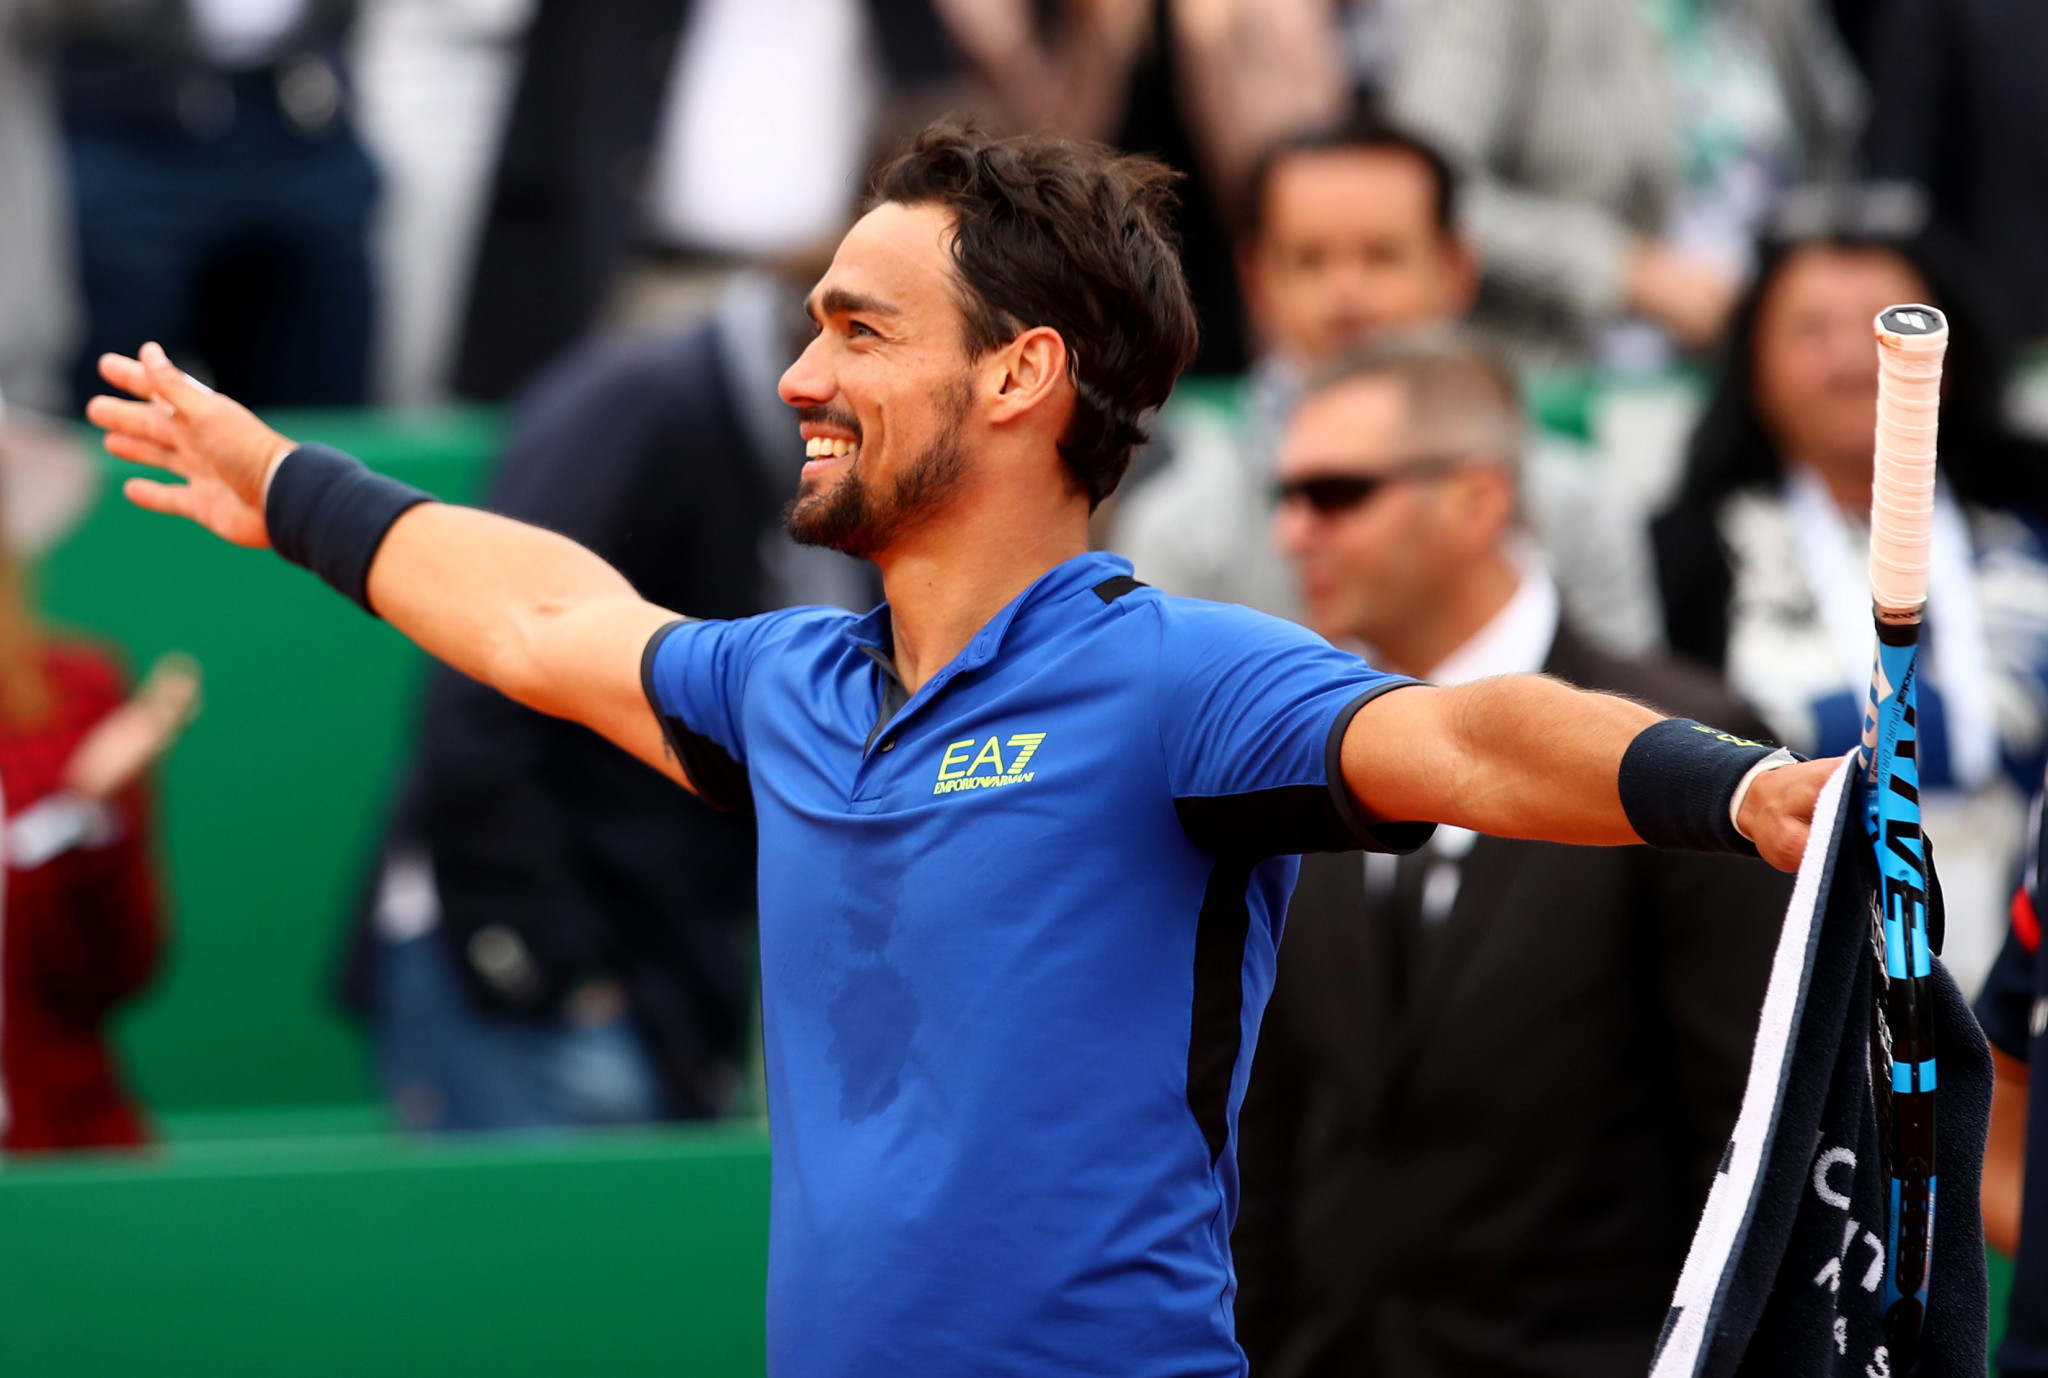 Italy's Fabio Fognini reached the final of the Monte-Carlo Masters ©Getty Images